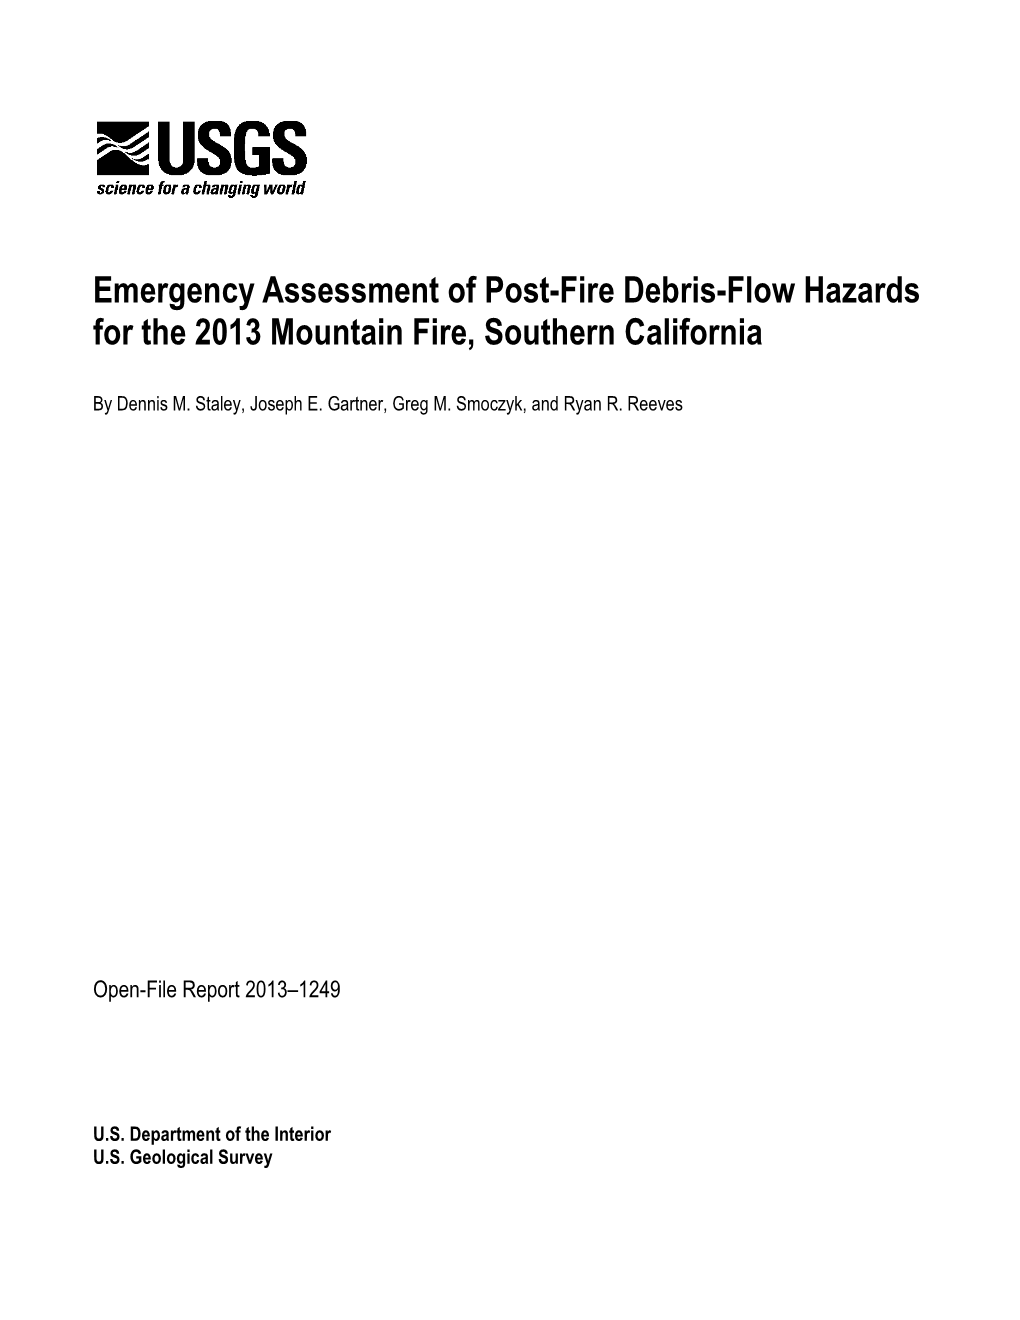 Emergency Assessment of Post-Fire Debris-Flow Hazards for the 2013 Mountain Fire, Southern California